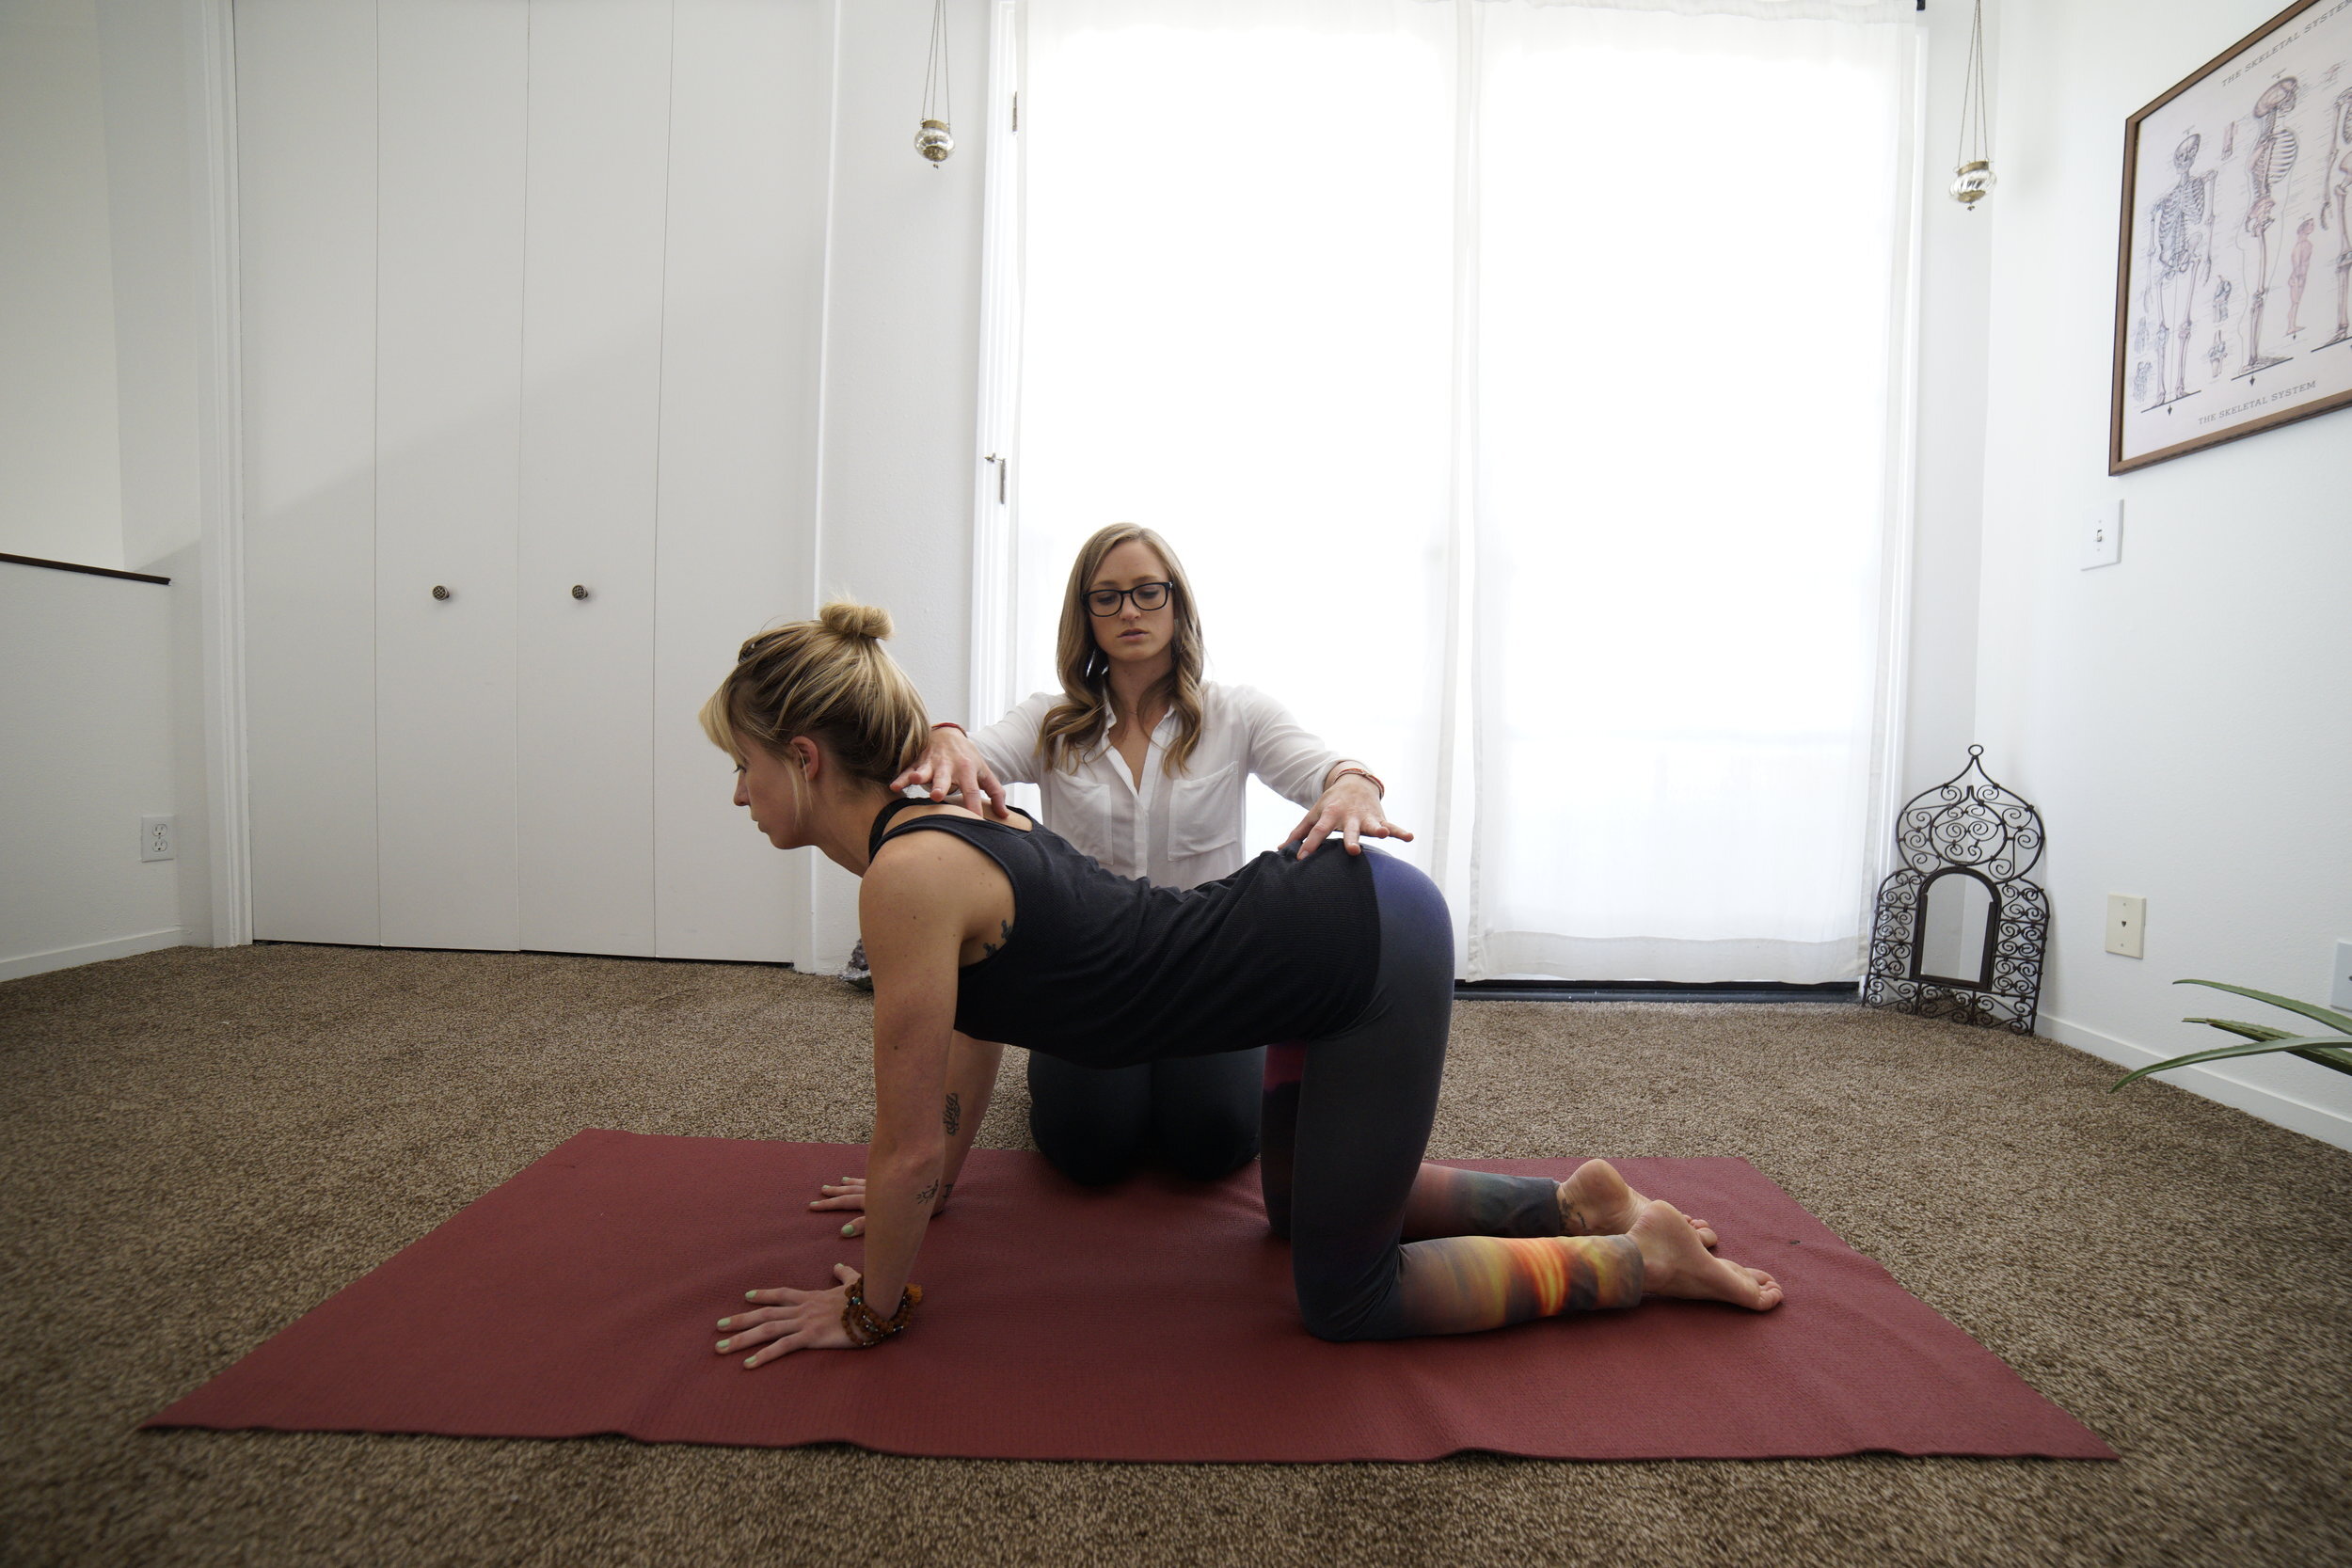 Dr. Casie Danenhauer Humble helping someone with cat and cow yoga pose